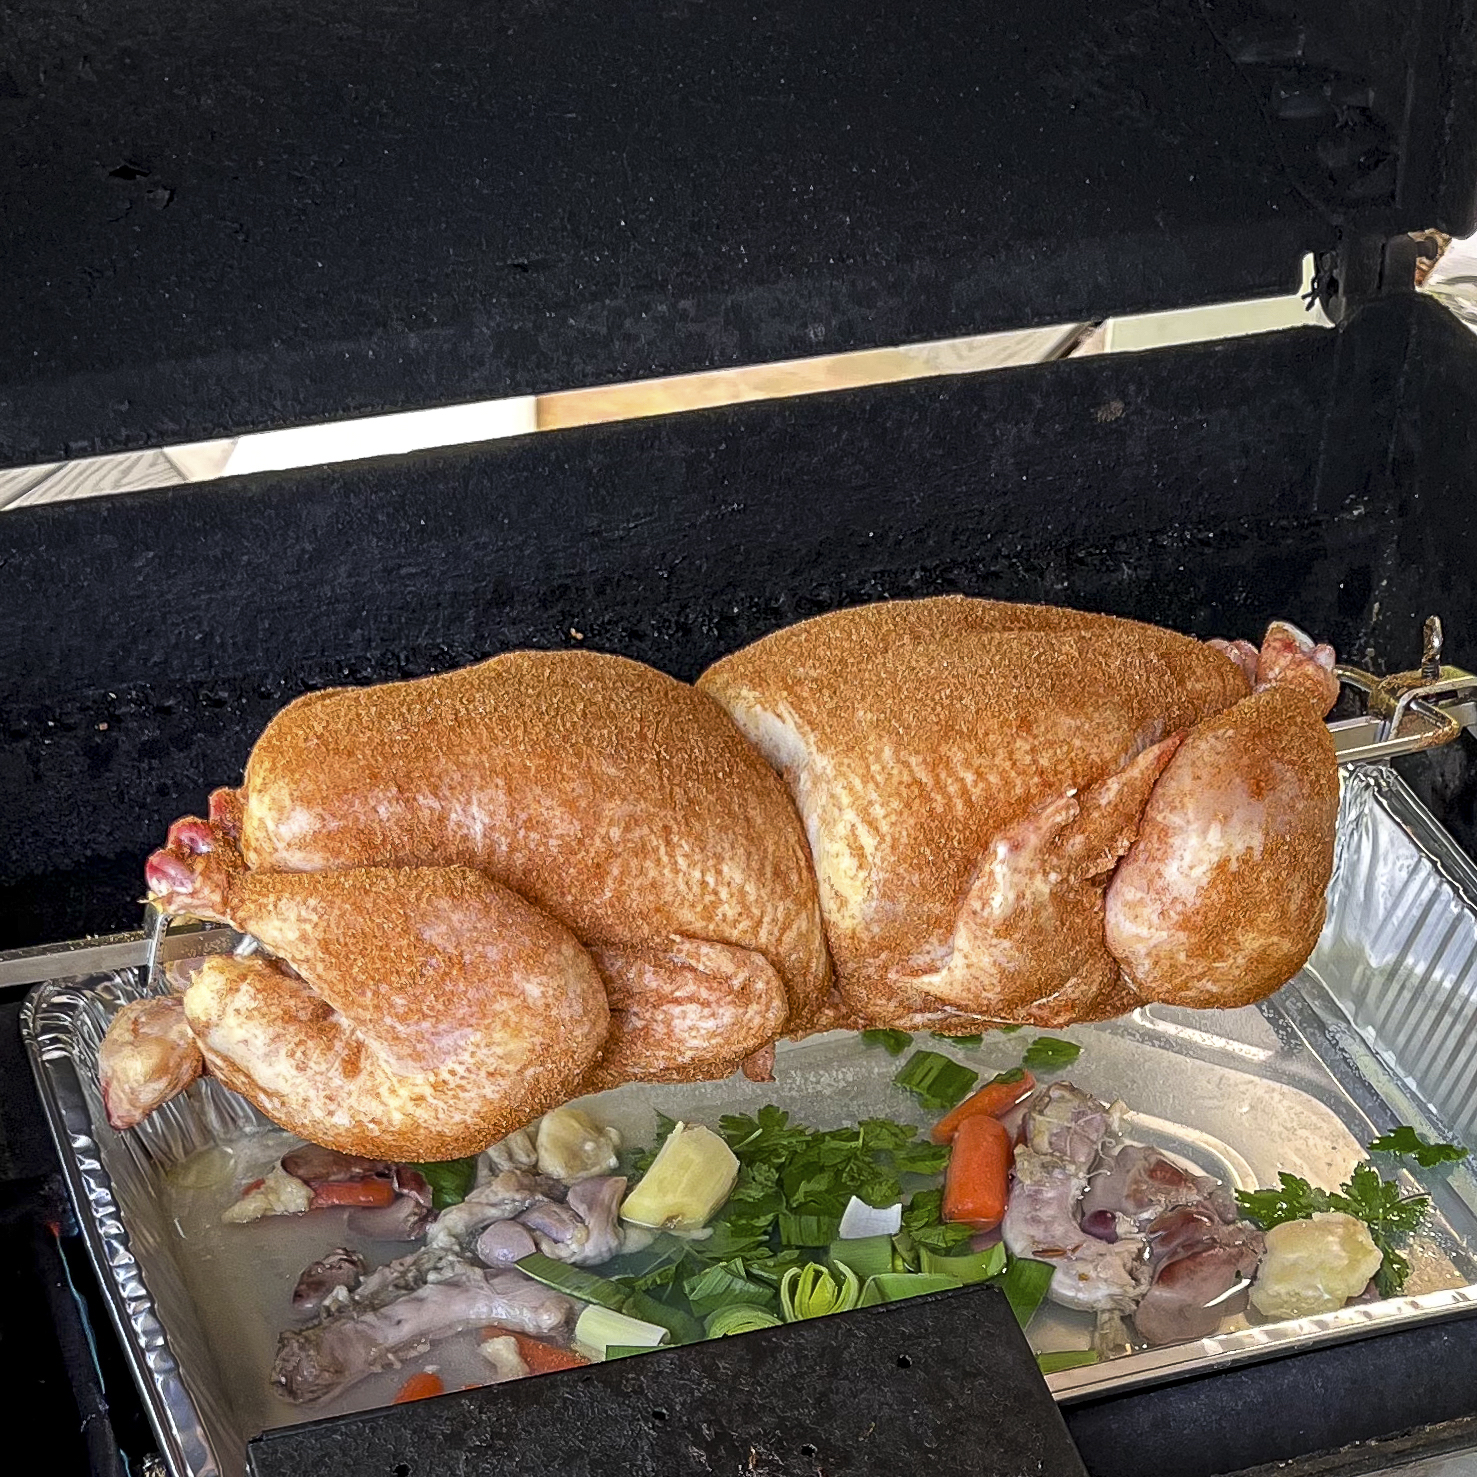 Two seasoned chickens are in the grill on a rotisserie spit rod.